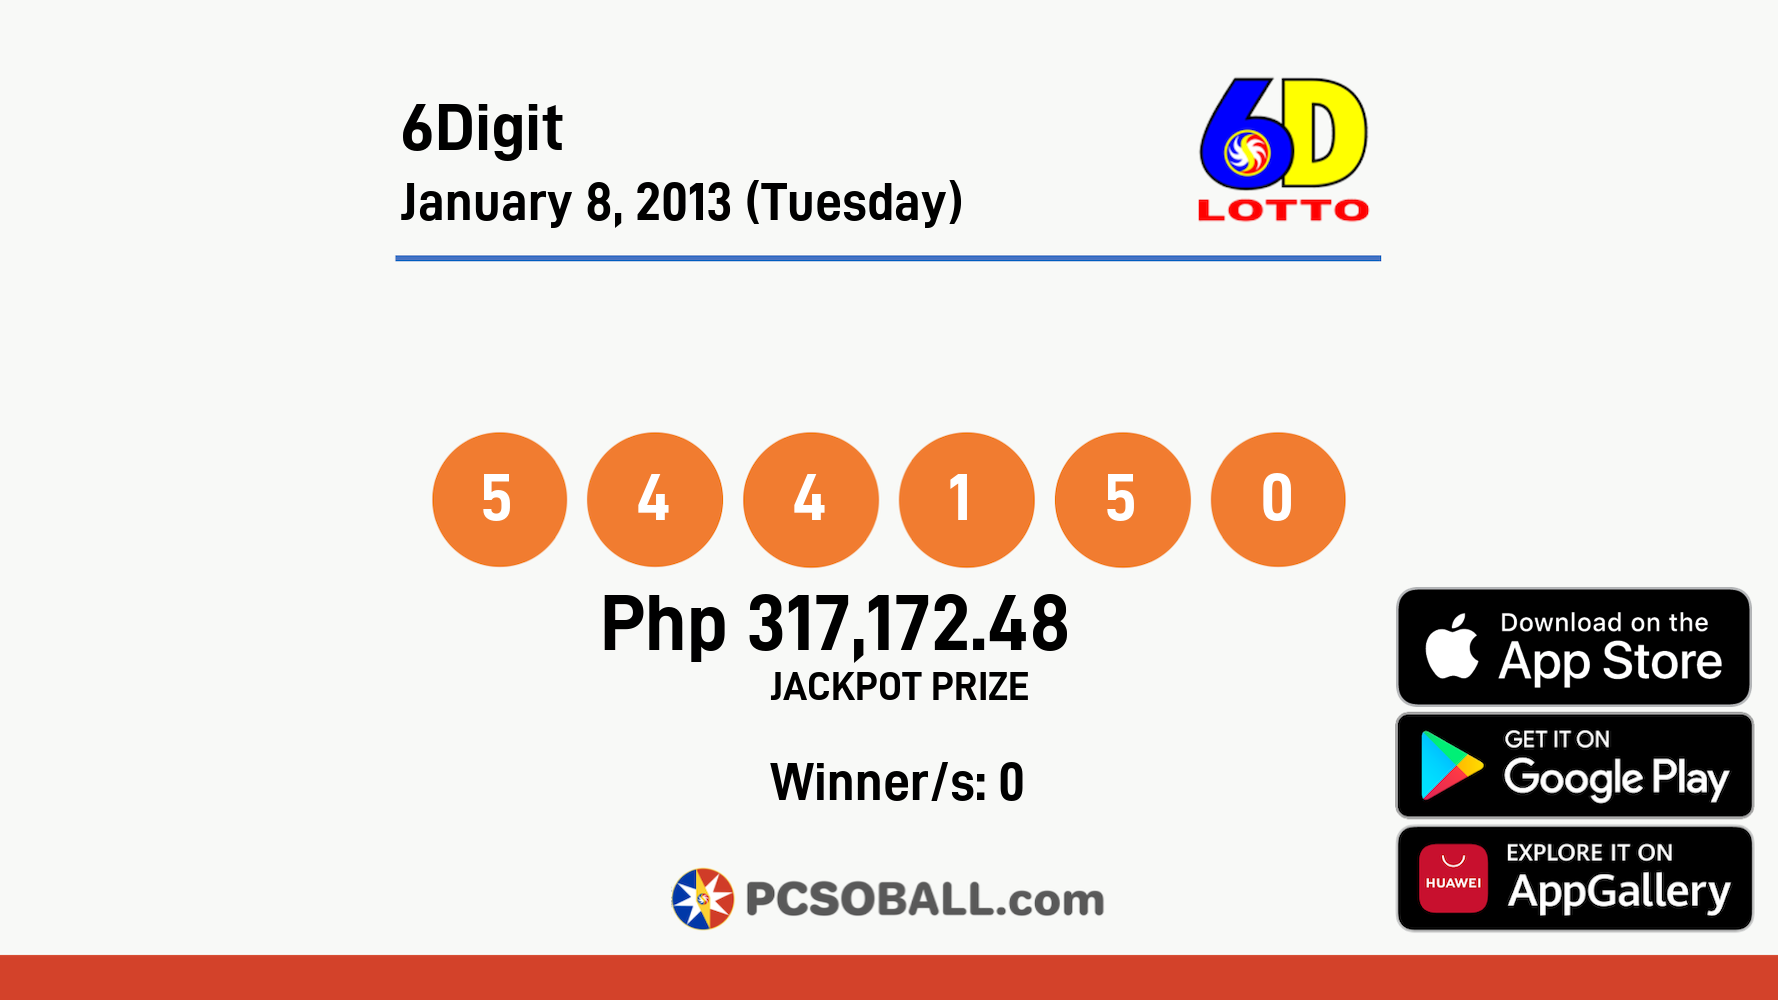 6Digit January 8, 2013 (Tuesday) Result